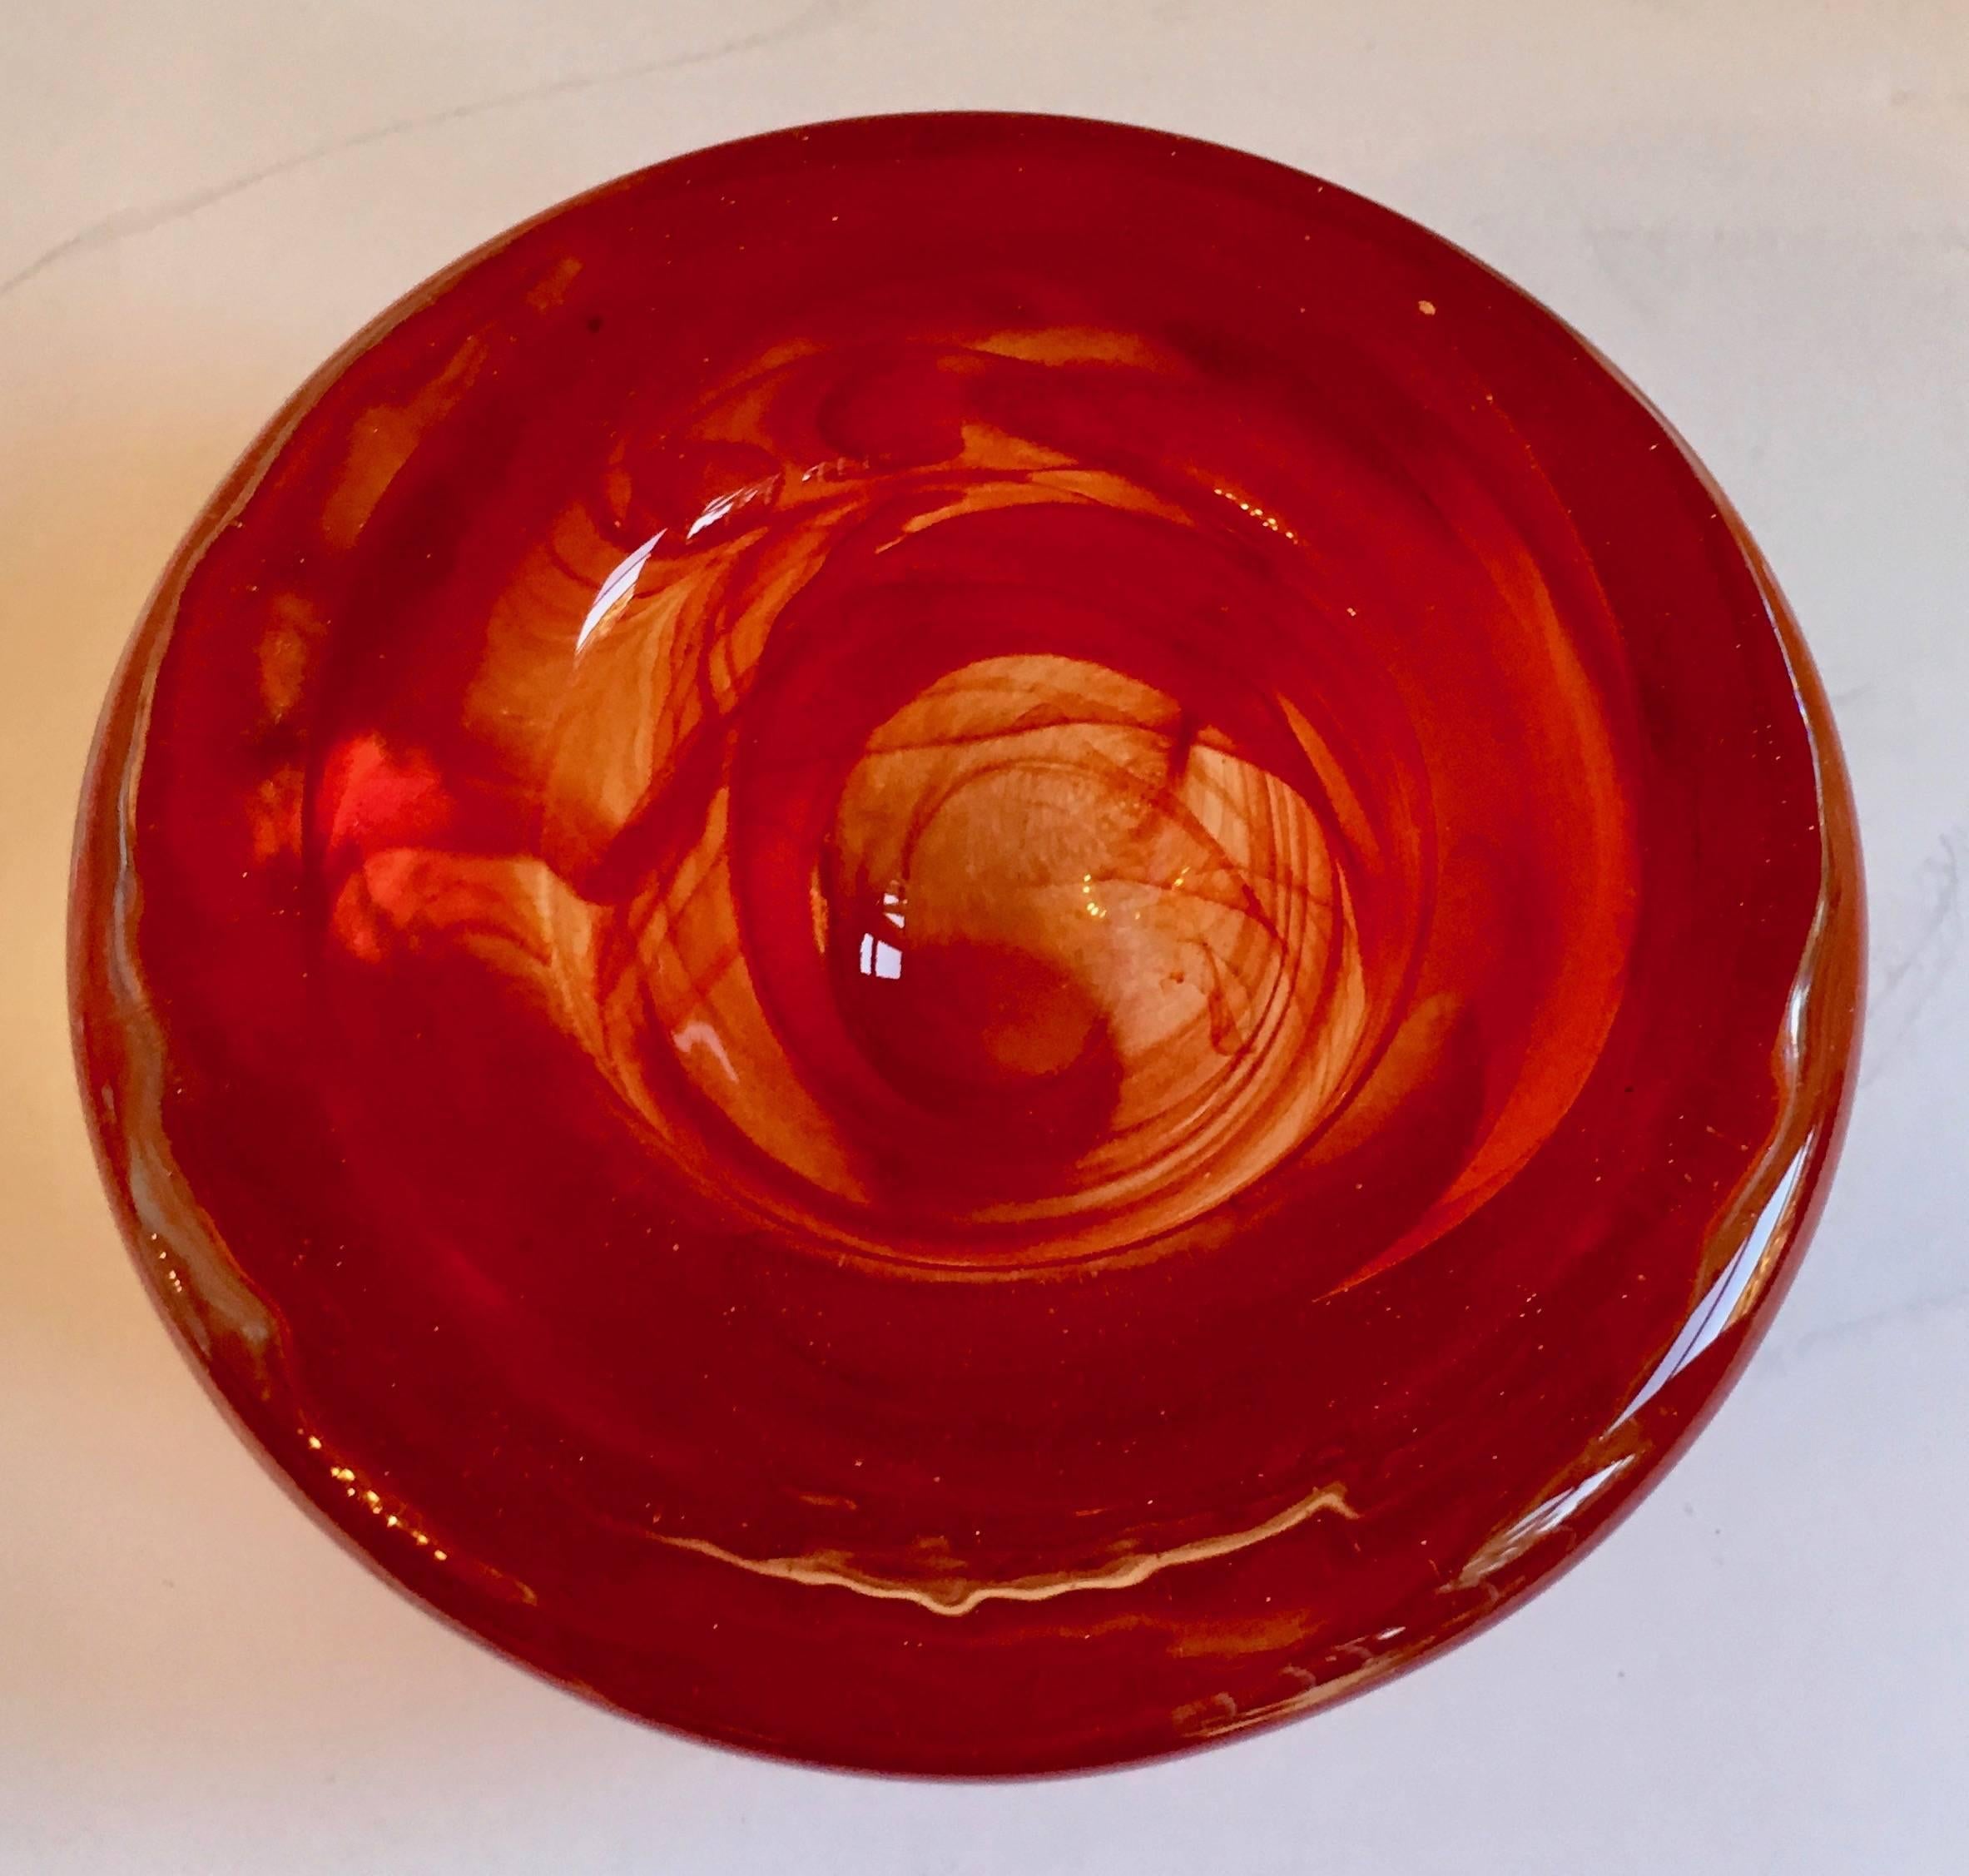 Red Kosta Boda bowl votive by Anna Ehrner, a beautiful art glass bowl, could be used as a votive or for the desk or bathroom, from paper clips to cotton balls.